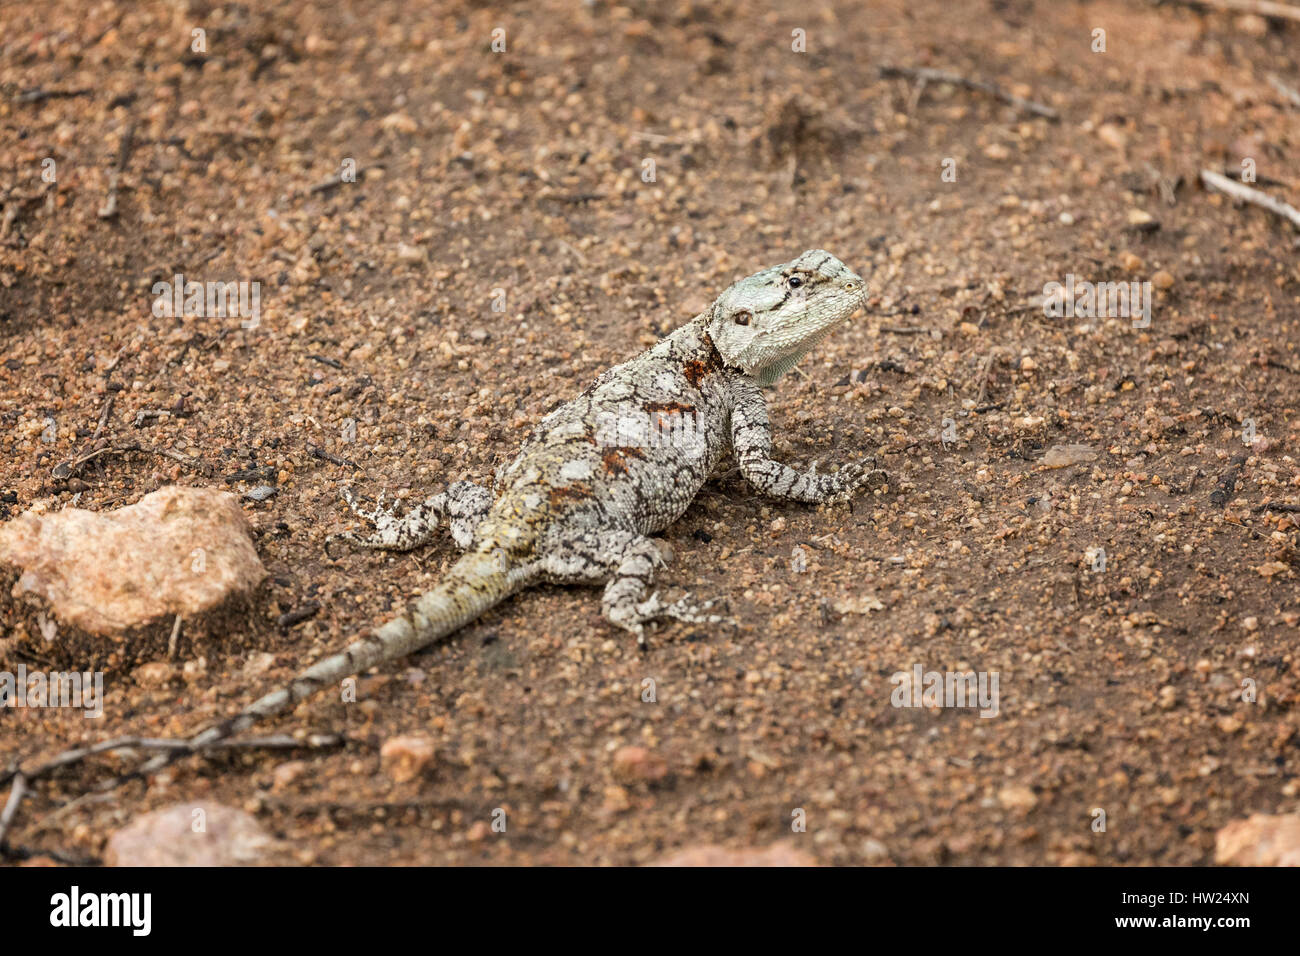 Female Southern Tree Agama lizard in Kruger National Park, South Africa. Stock Photo